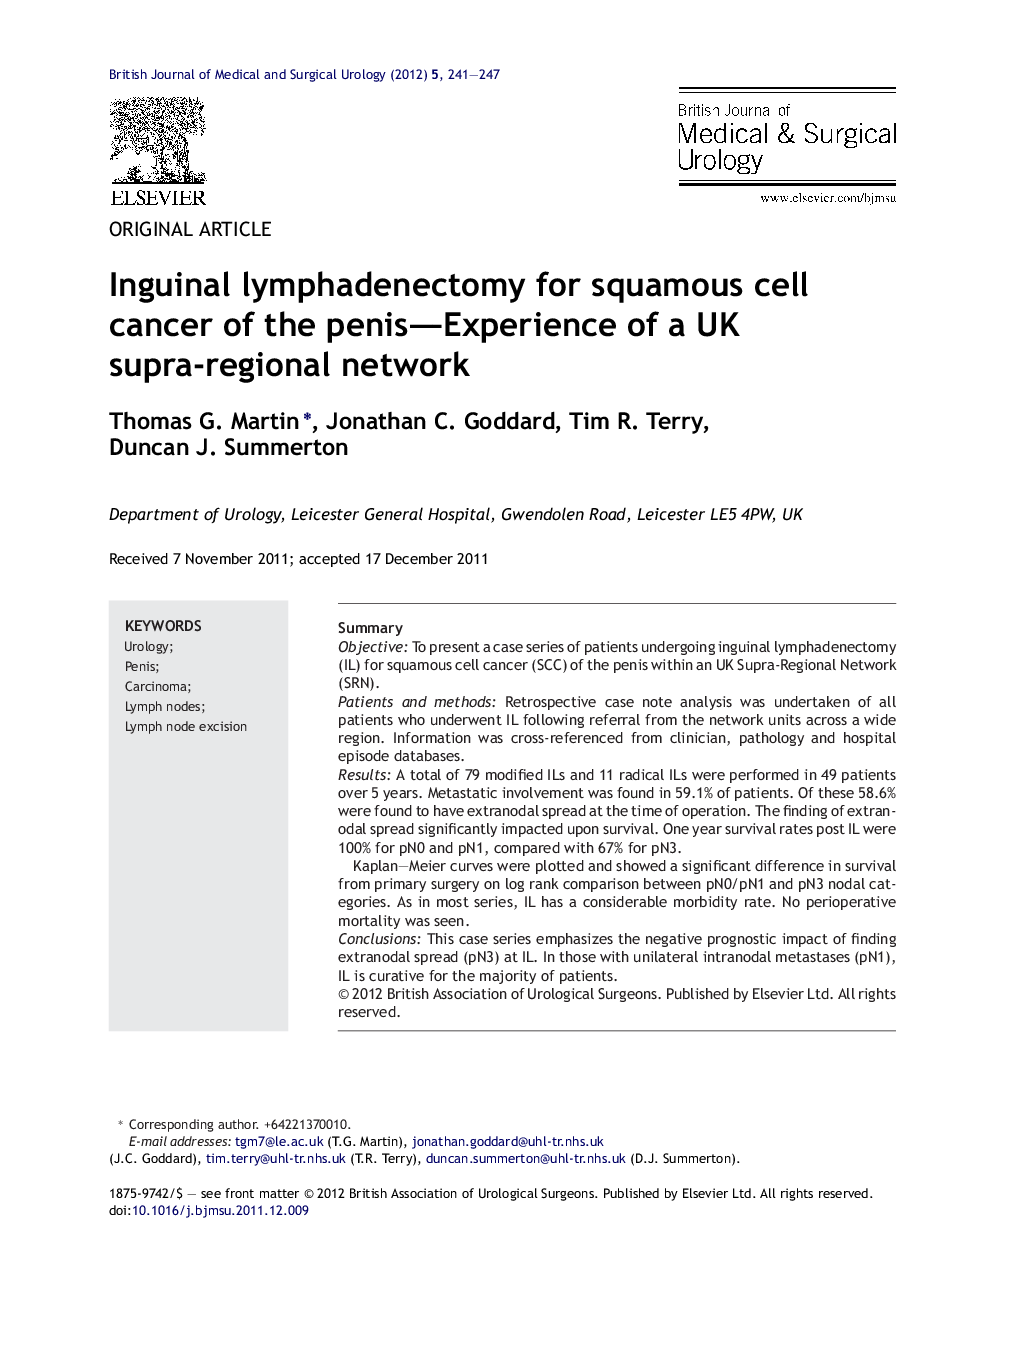 Inguinal lymphadenectomy for squamous cell cancer of the penis—Experience of a UK supra-regional network